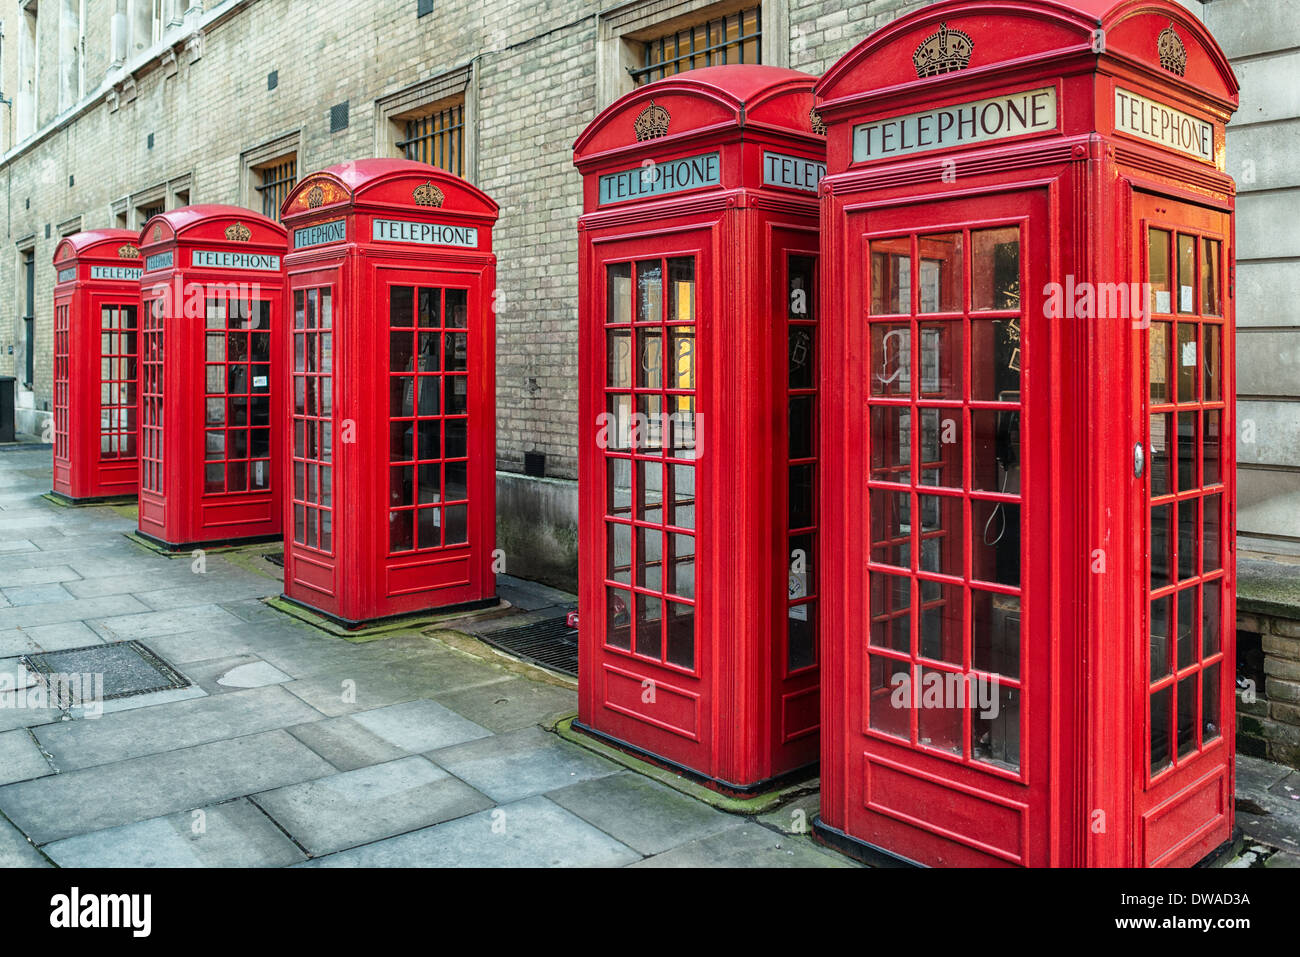 K2 red telephone boxes on Broad Street, Covent Garden, London Stock Photo